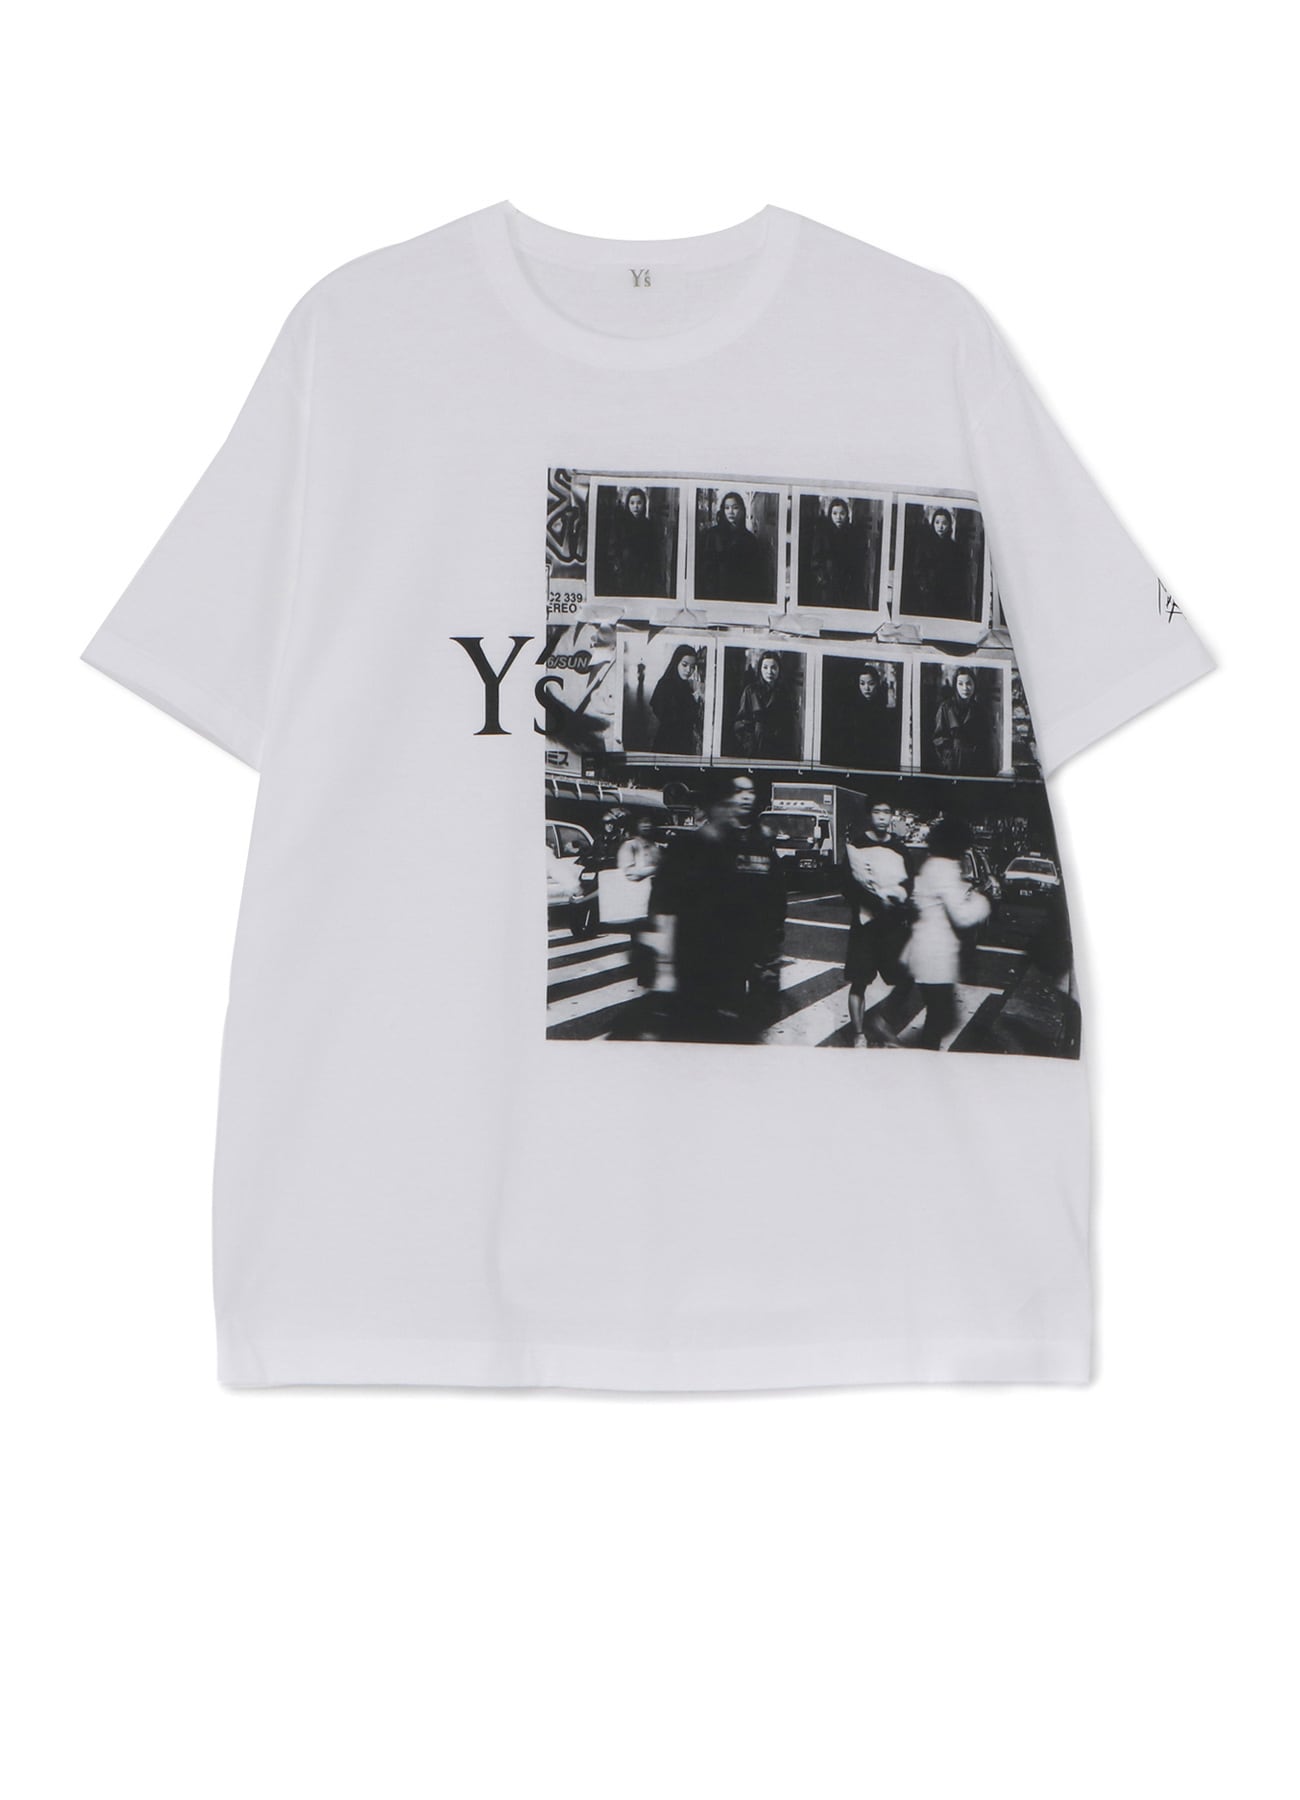 Y's｜ [Official] THE SHOP YOHJI YAMAMOTO (page 5/9)